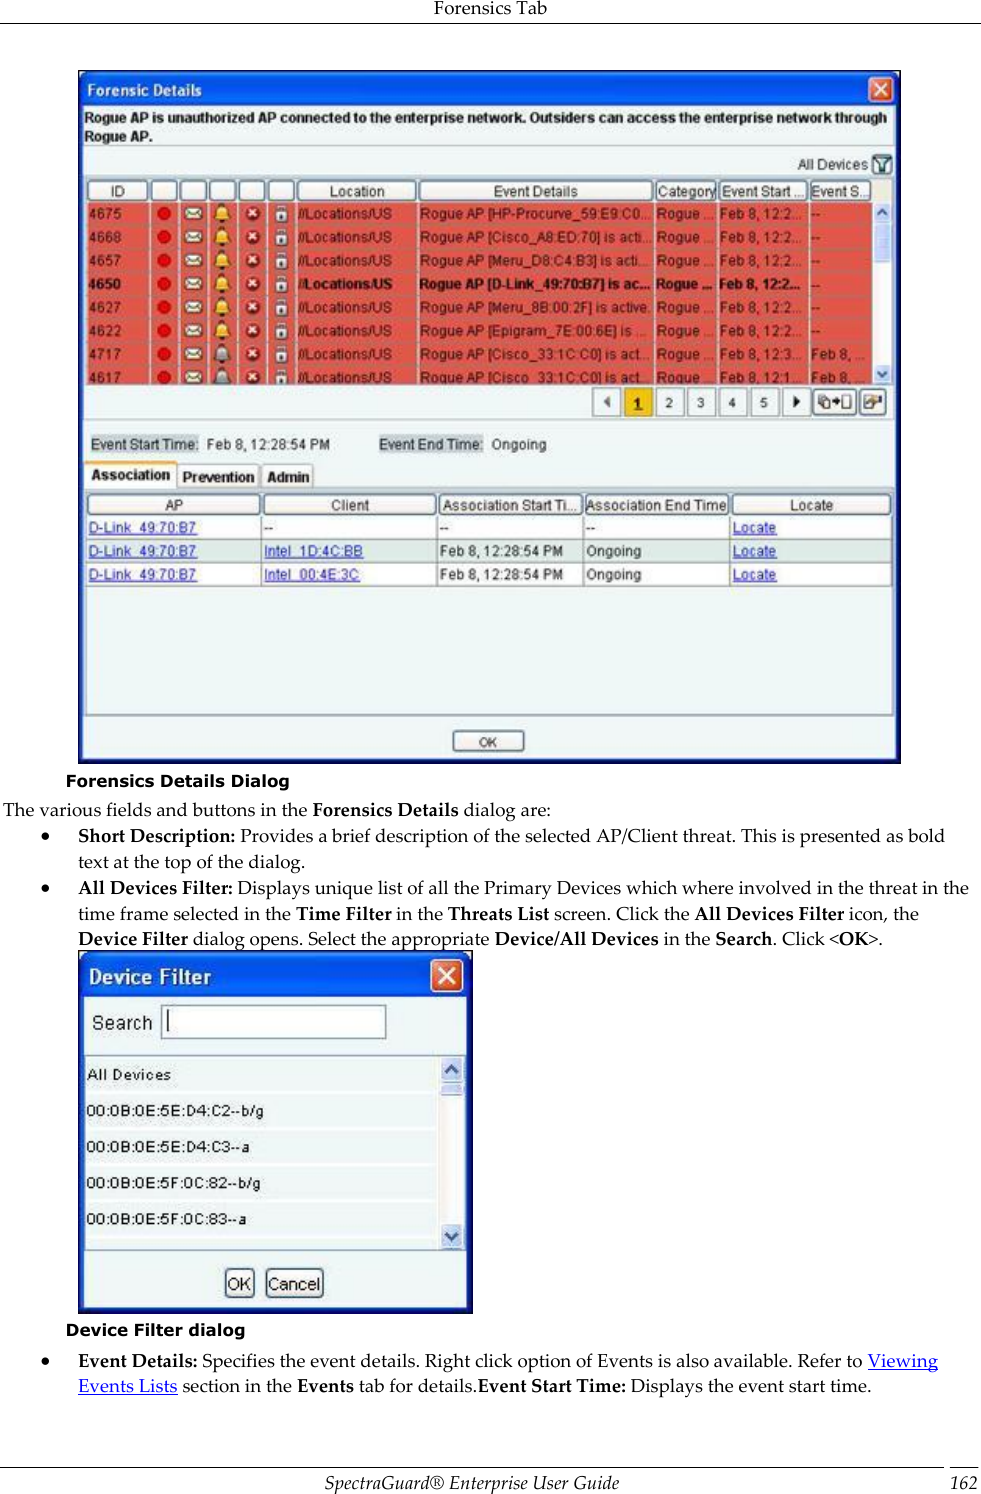 Forensics Tab SpectraGuard®  Enterprise User Guide 162  Forensics Details Dialog The various fields and buttons in the Forensics Details dialog are:  Short Description: Provides a brief description of the selected AP/Client threat. This is presented as bold text at the top of the dialog.  All Devices Filter: Displays unique list of all the Primary Devices which where involved in the threat in the time frame selected in the Time Filter in the Threats List screen. Click the All Devices Filter icon, the Device Filter dialog opens. Select the appropriate Device/All Devices in the Search. Click &lt;OK&gt;.  Device Filter dialog  Event Details: Specifies the event details. Right click option of Events is also available. Refer to Viewing Events Lists section in the Events tab for details.Event Start Time: Displays the event start time. 